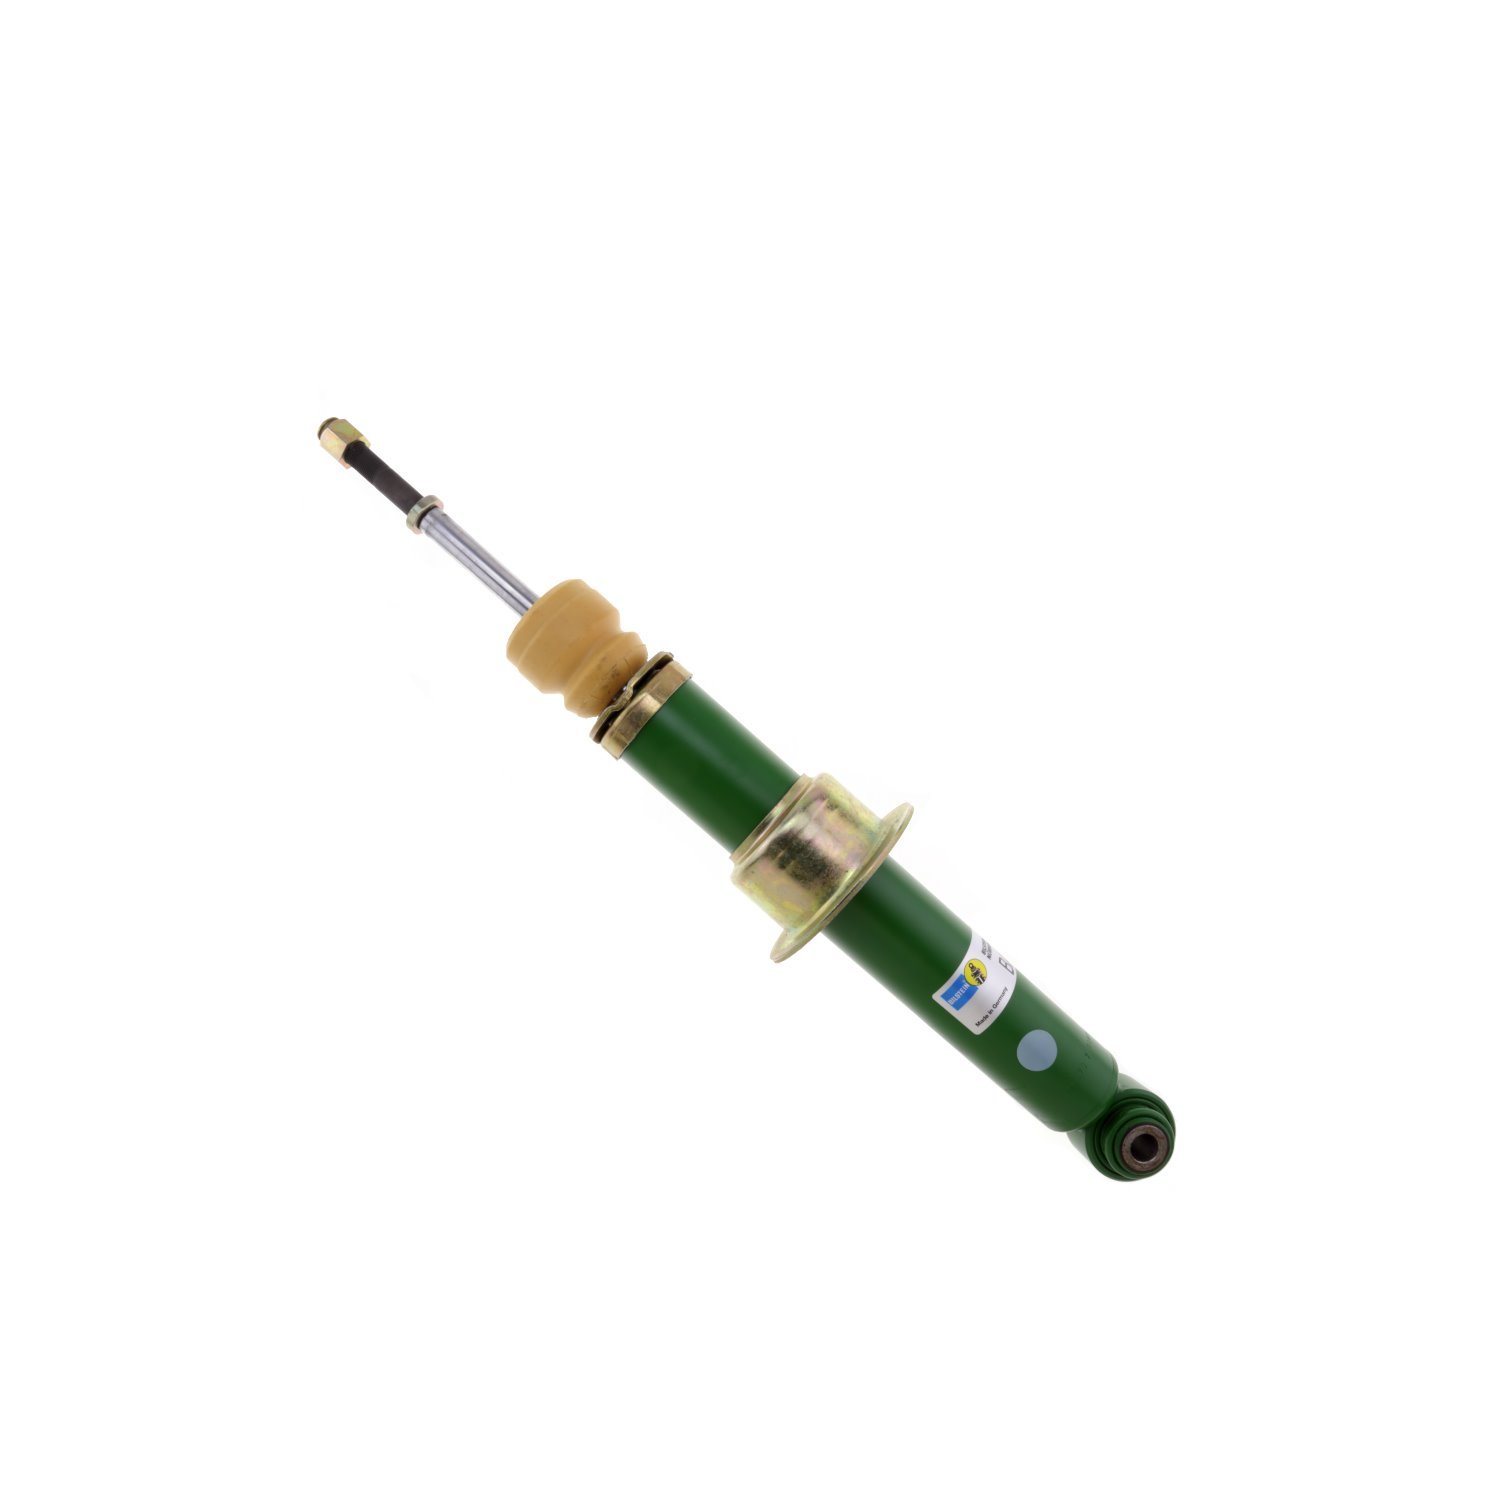 B4 OE Replacement (DampTronic) - Shock Absorber